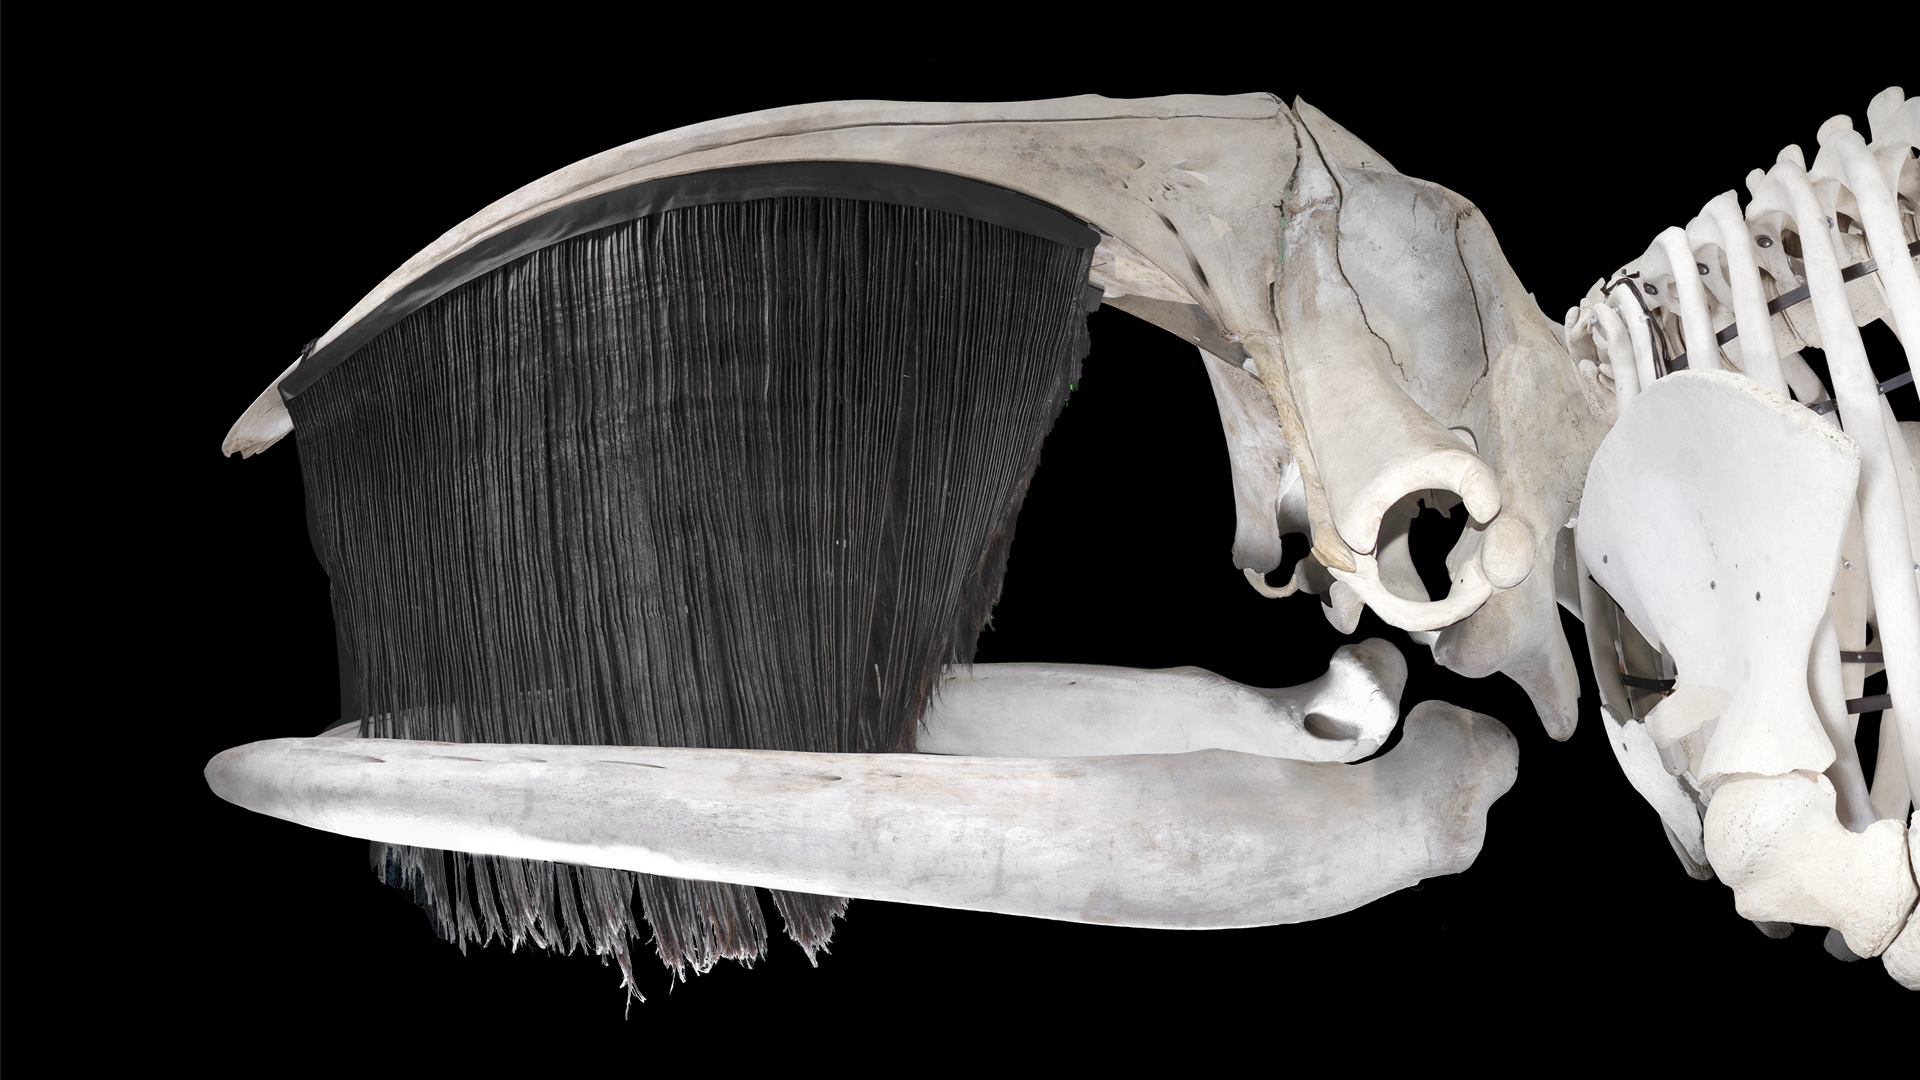 Whale skeleton with long black baleen descending from the upper jaw.